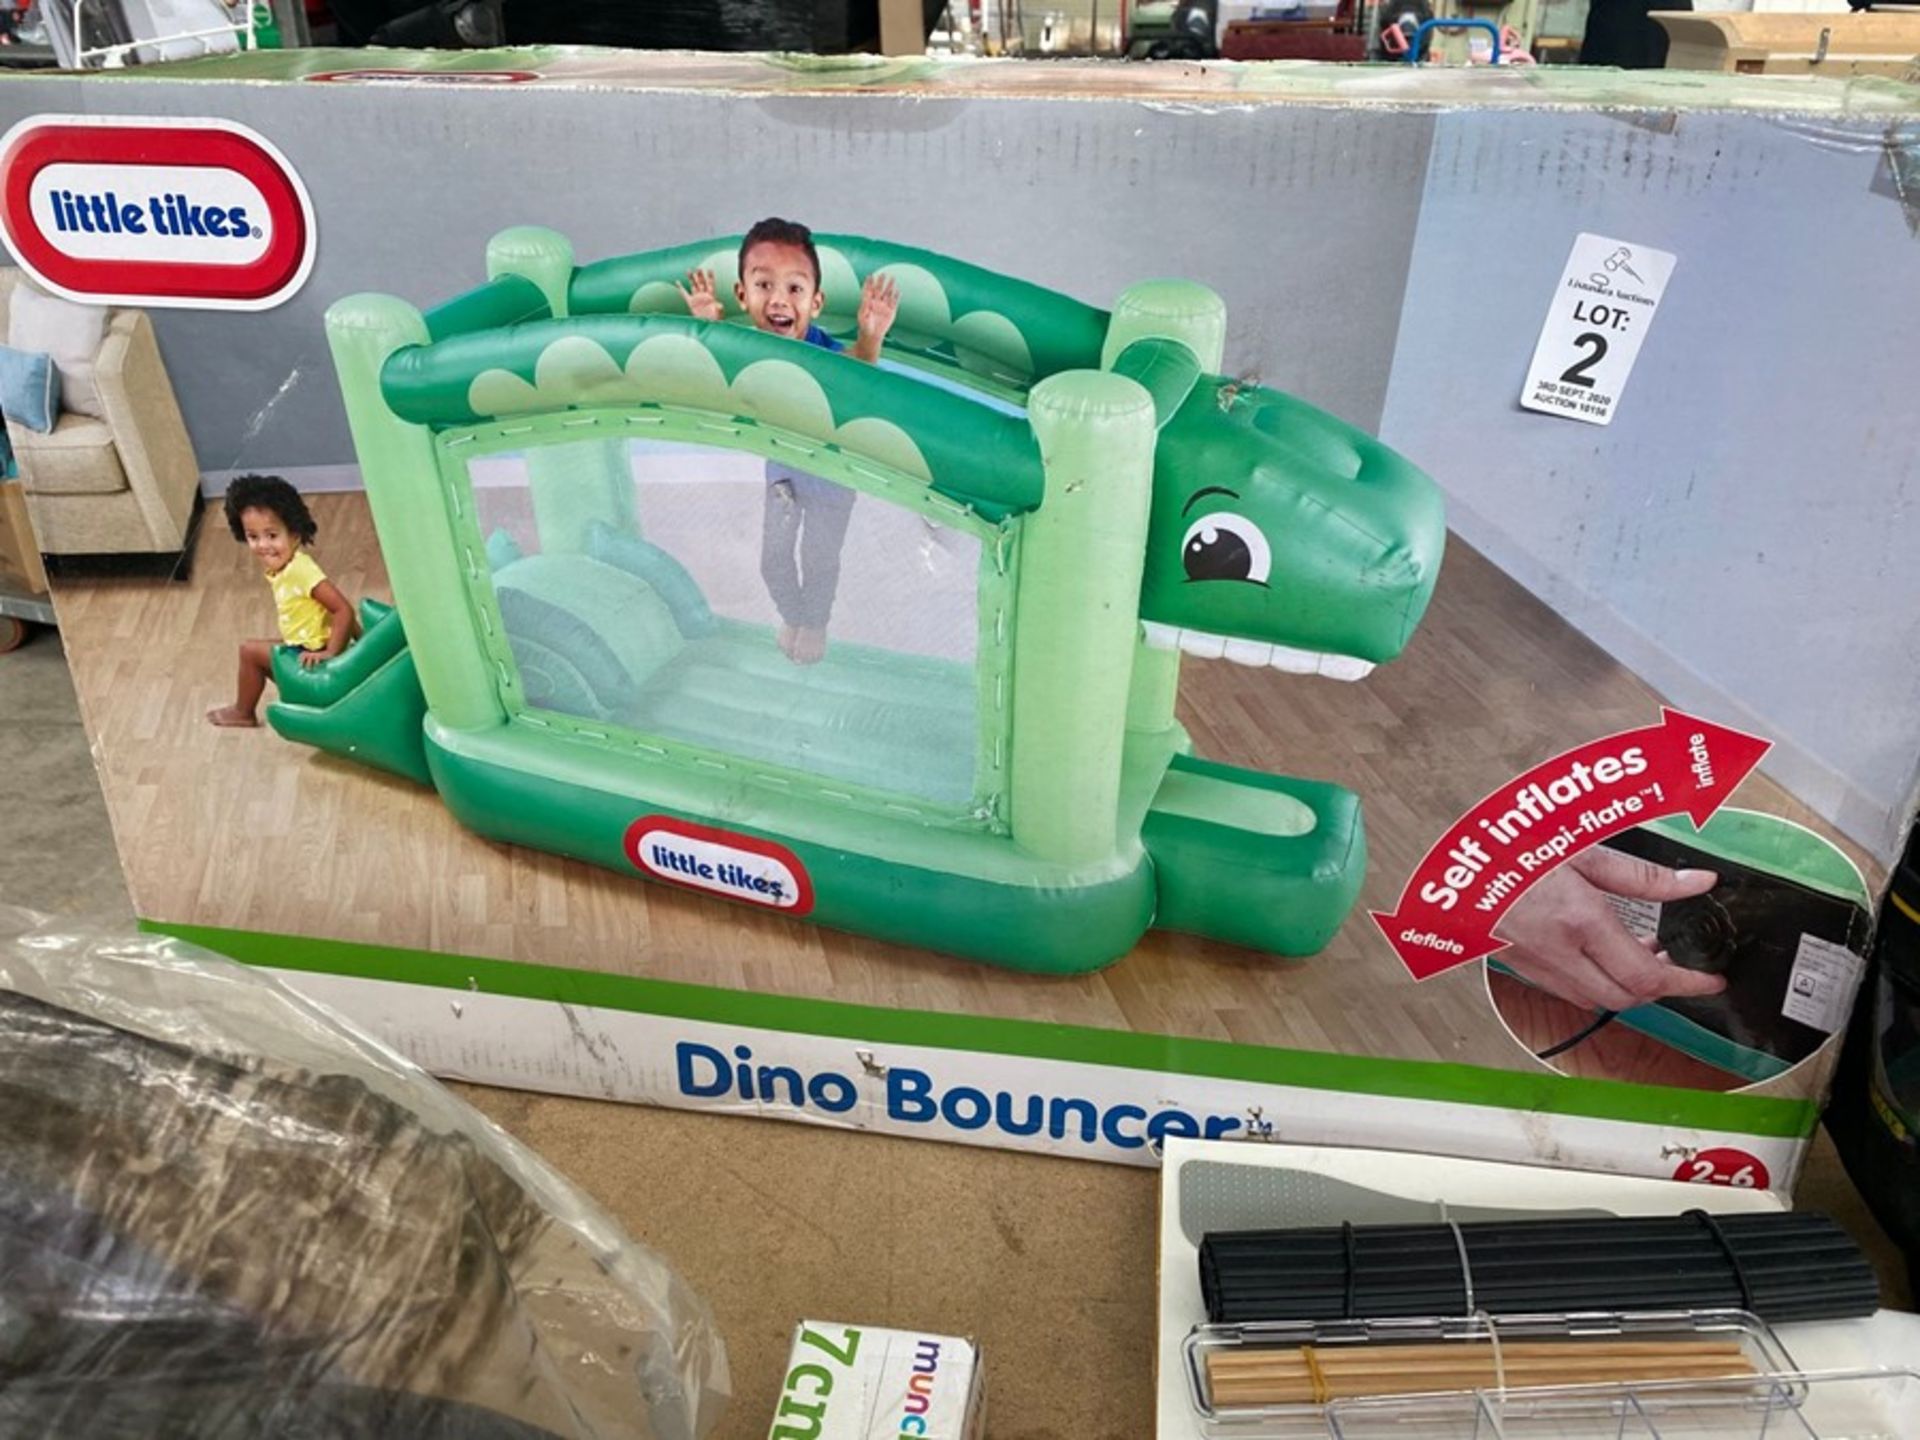 LITTLE TIKES DINO BOUNCER BOXED